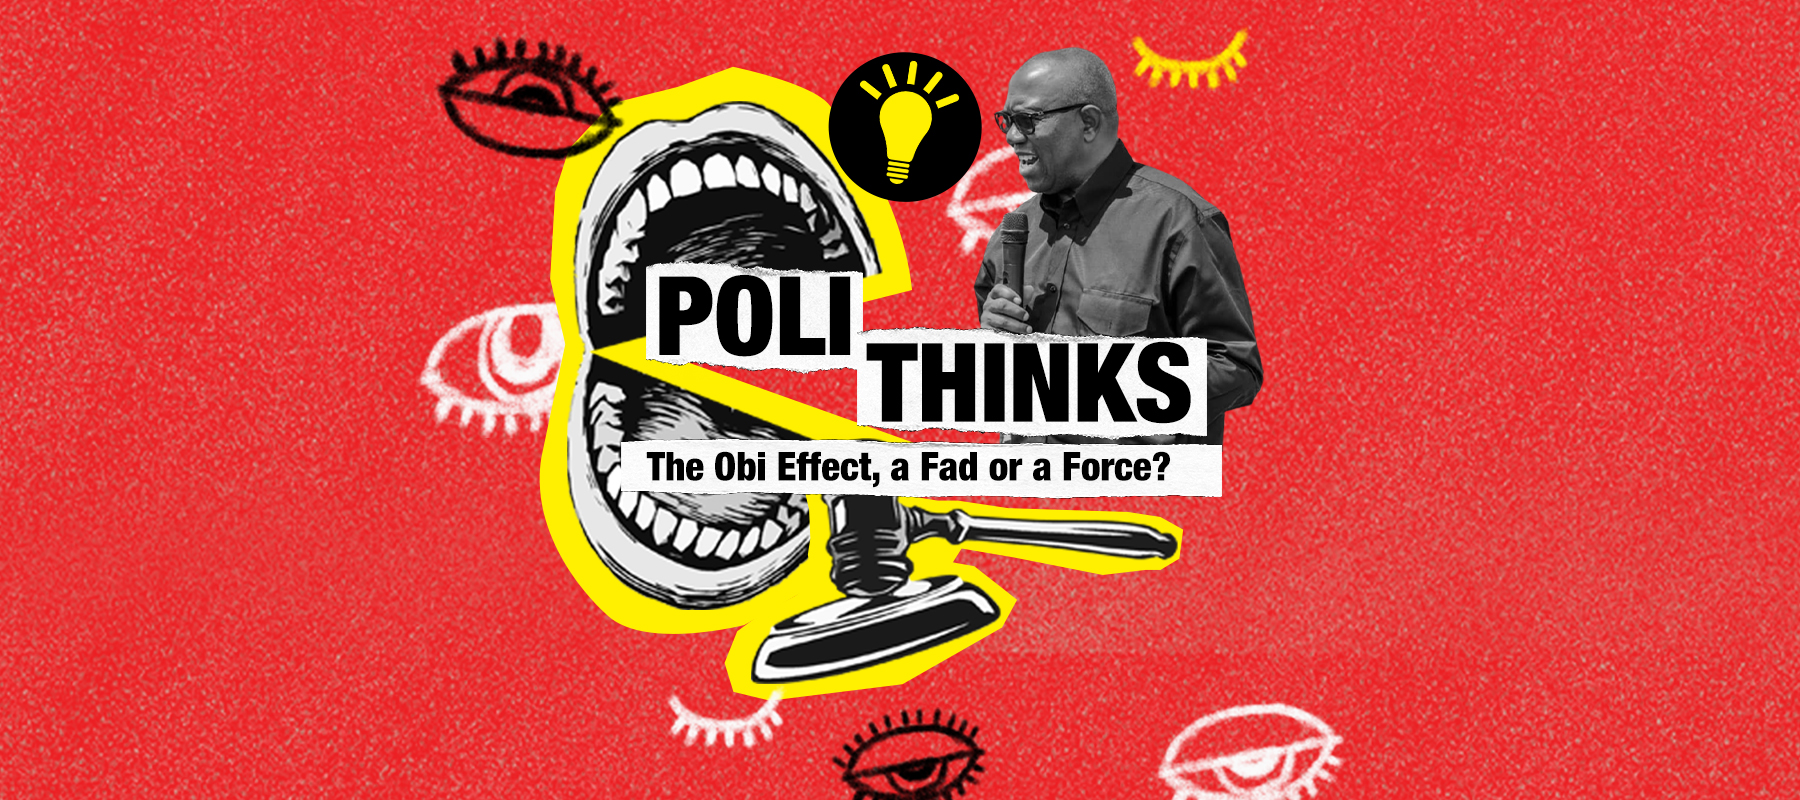 Polithinks: The Obi Effect ー A Fad or a Force?